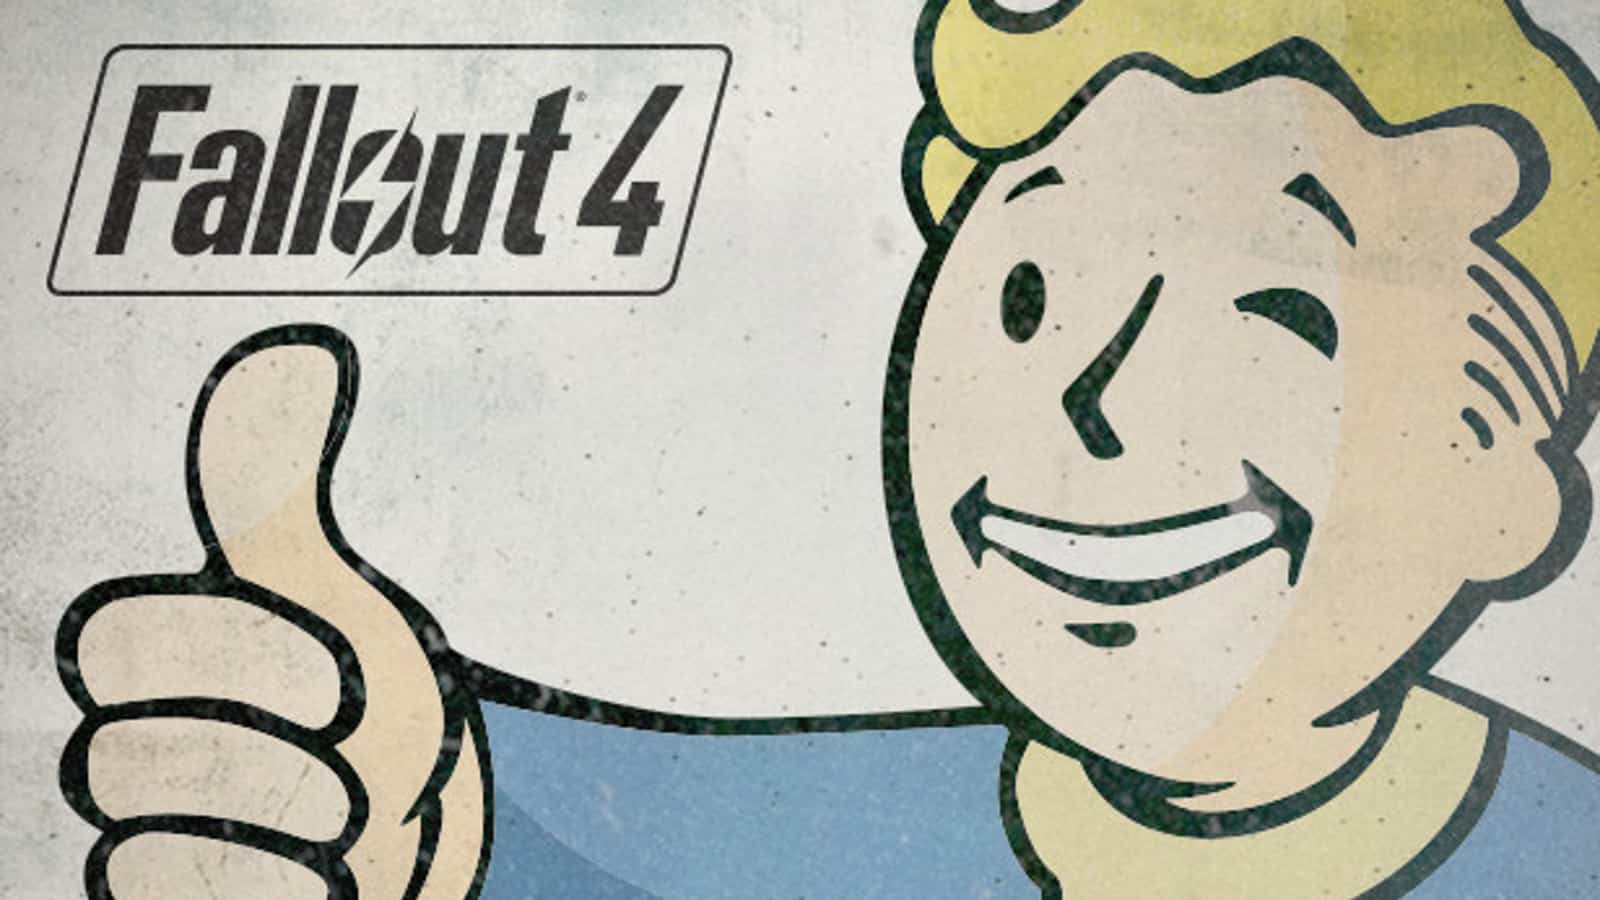 10 Craziest Glitches In Fallout 4 (& Why They Happen)